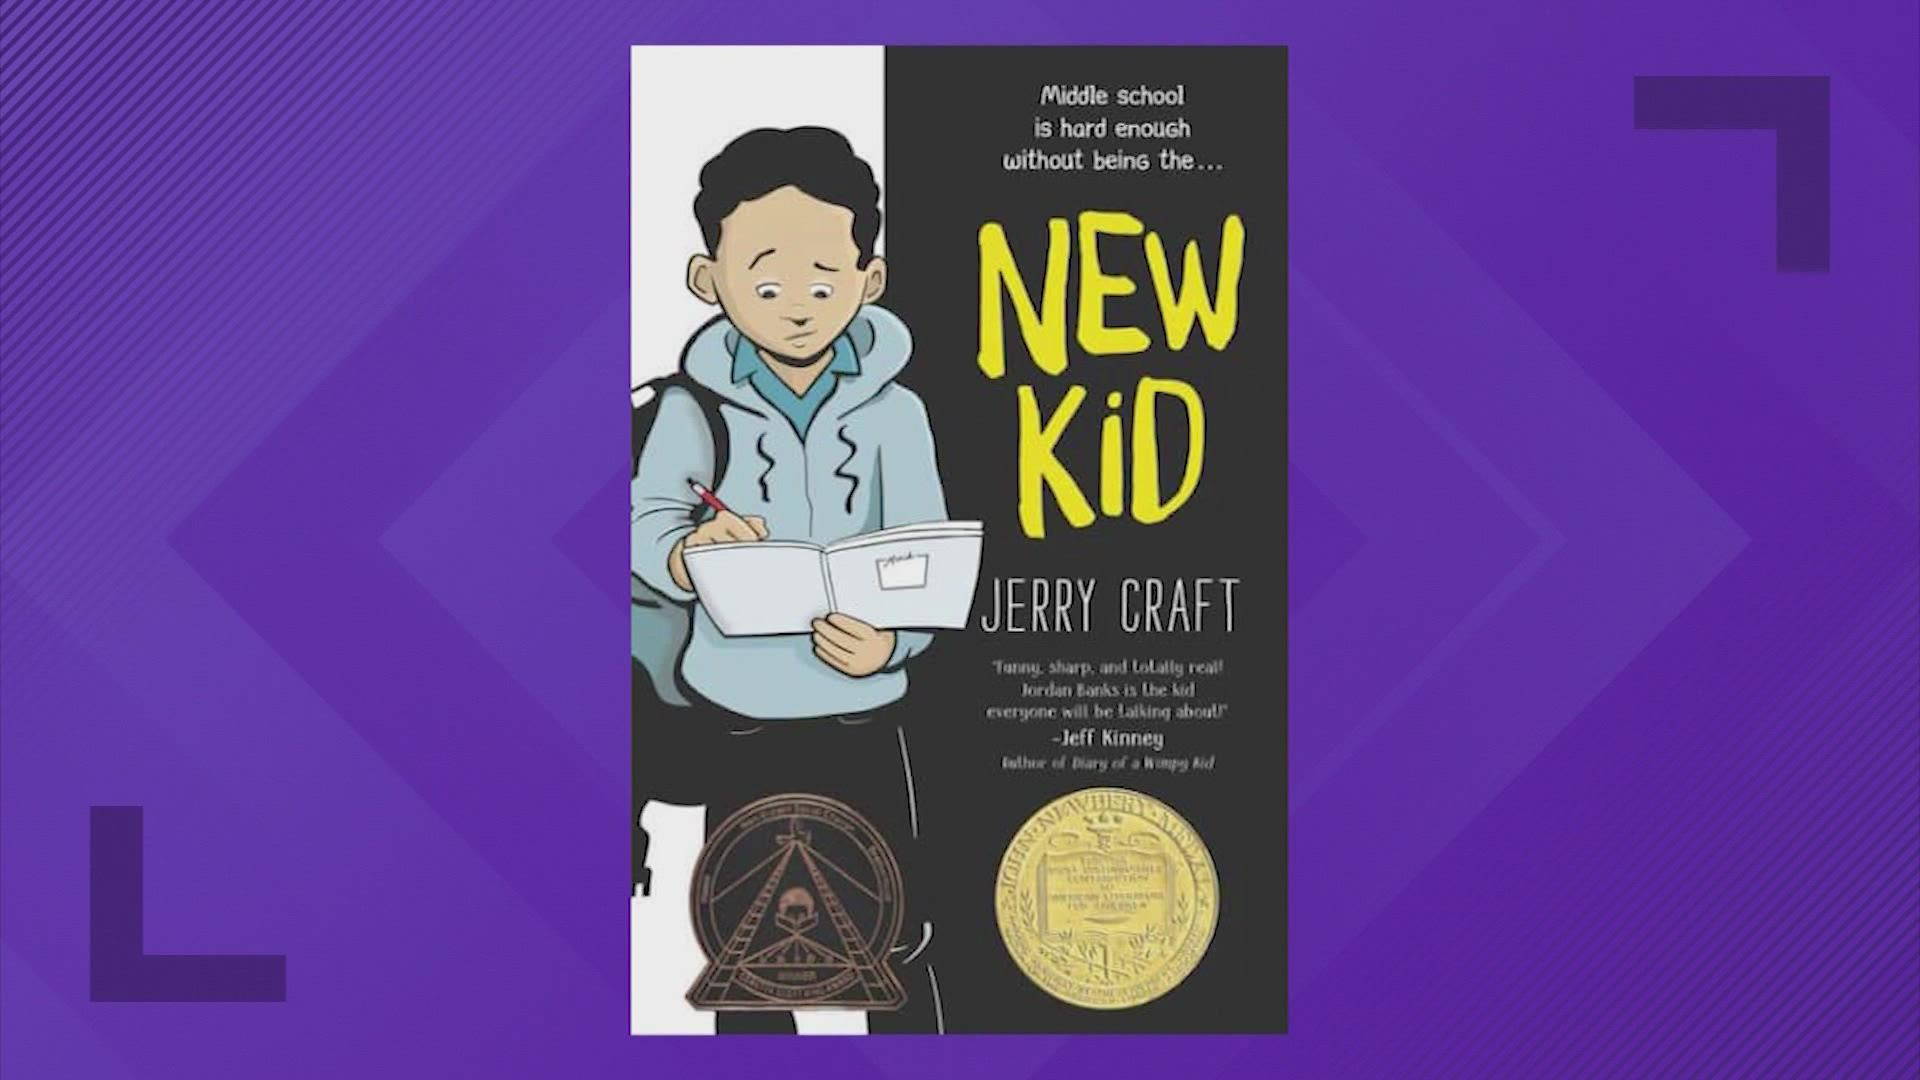 A book that Katy ISD had been reviewing, based on complaints, is now back on school library shelves and its author's virtual visit rescheduled.